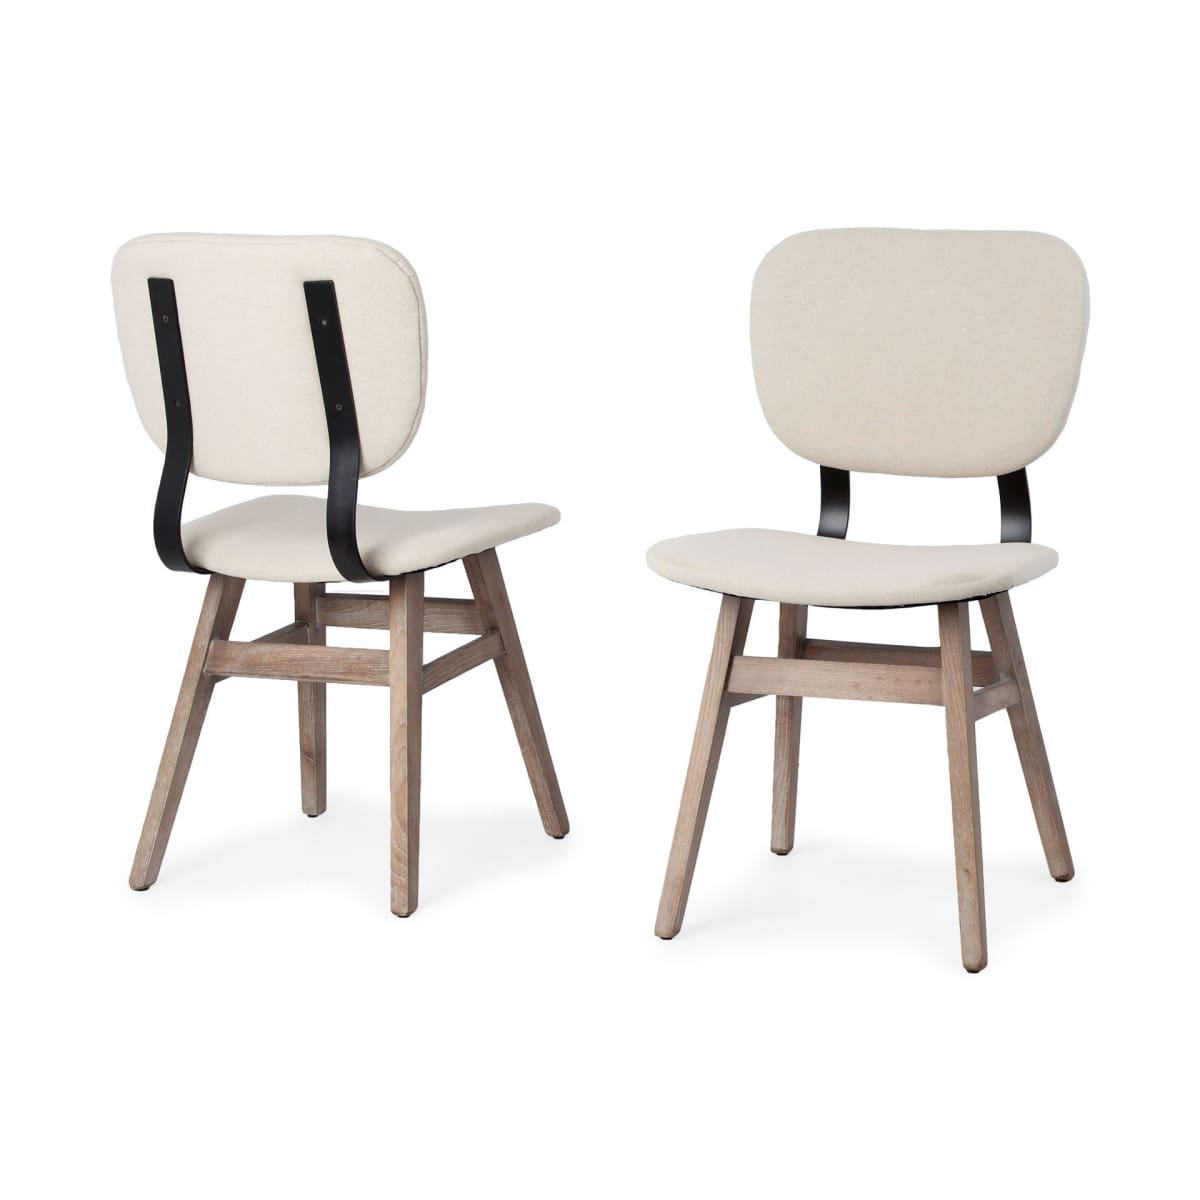 Haden Dining Chair Cream Fabric | Brown Wood - dining-chairs